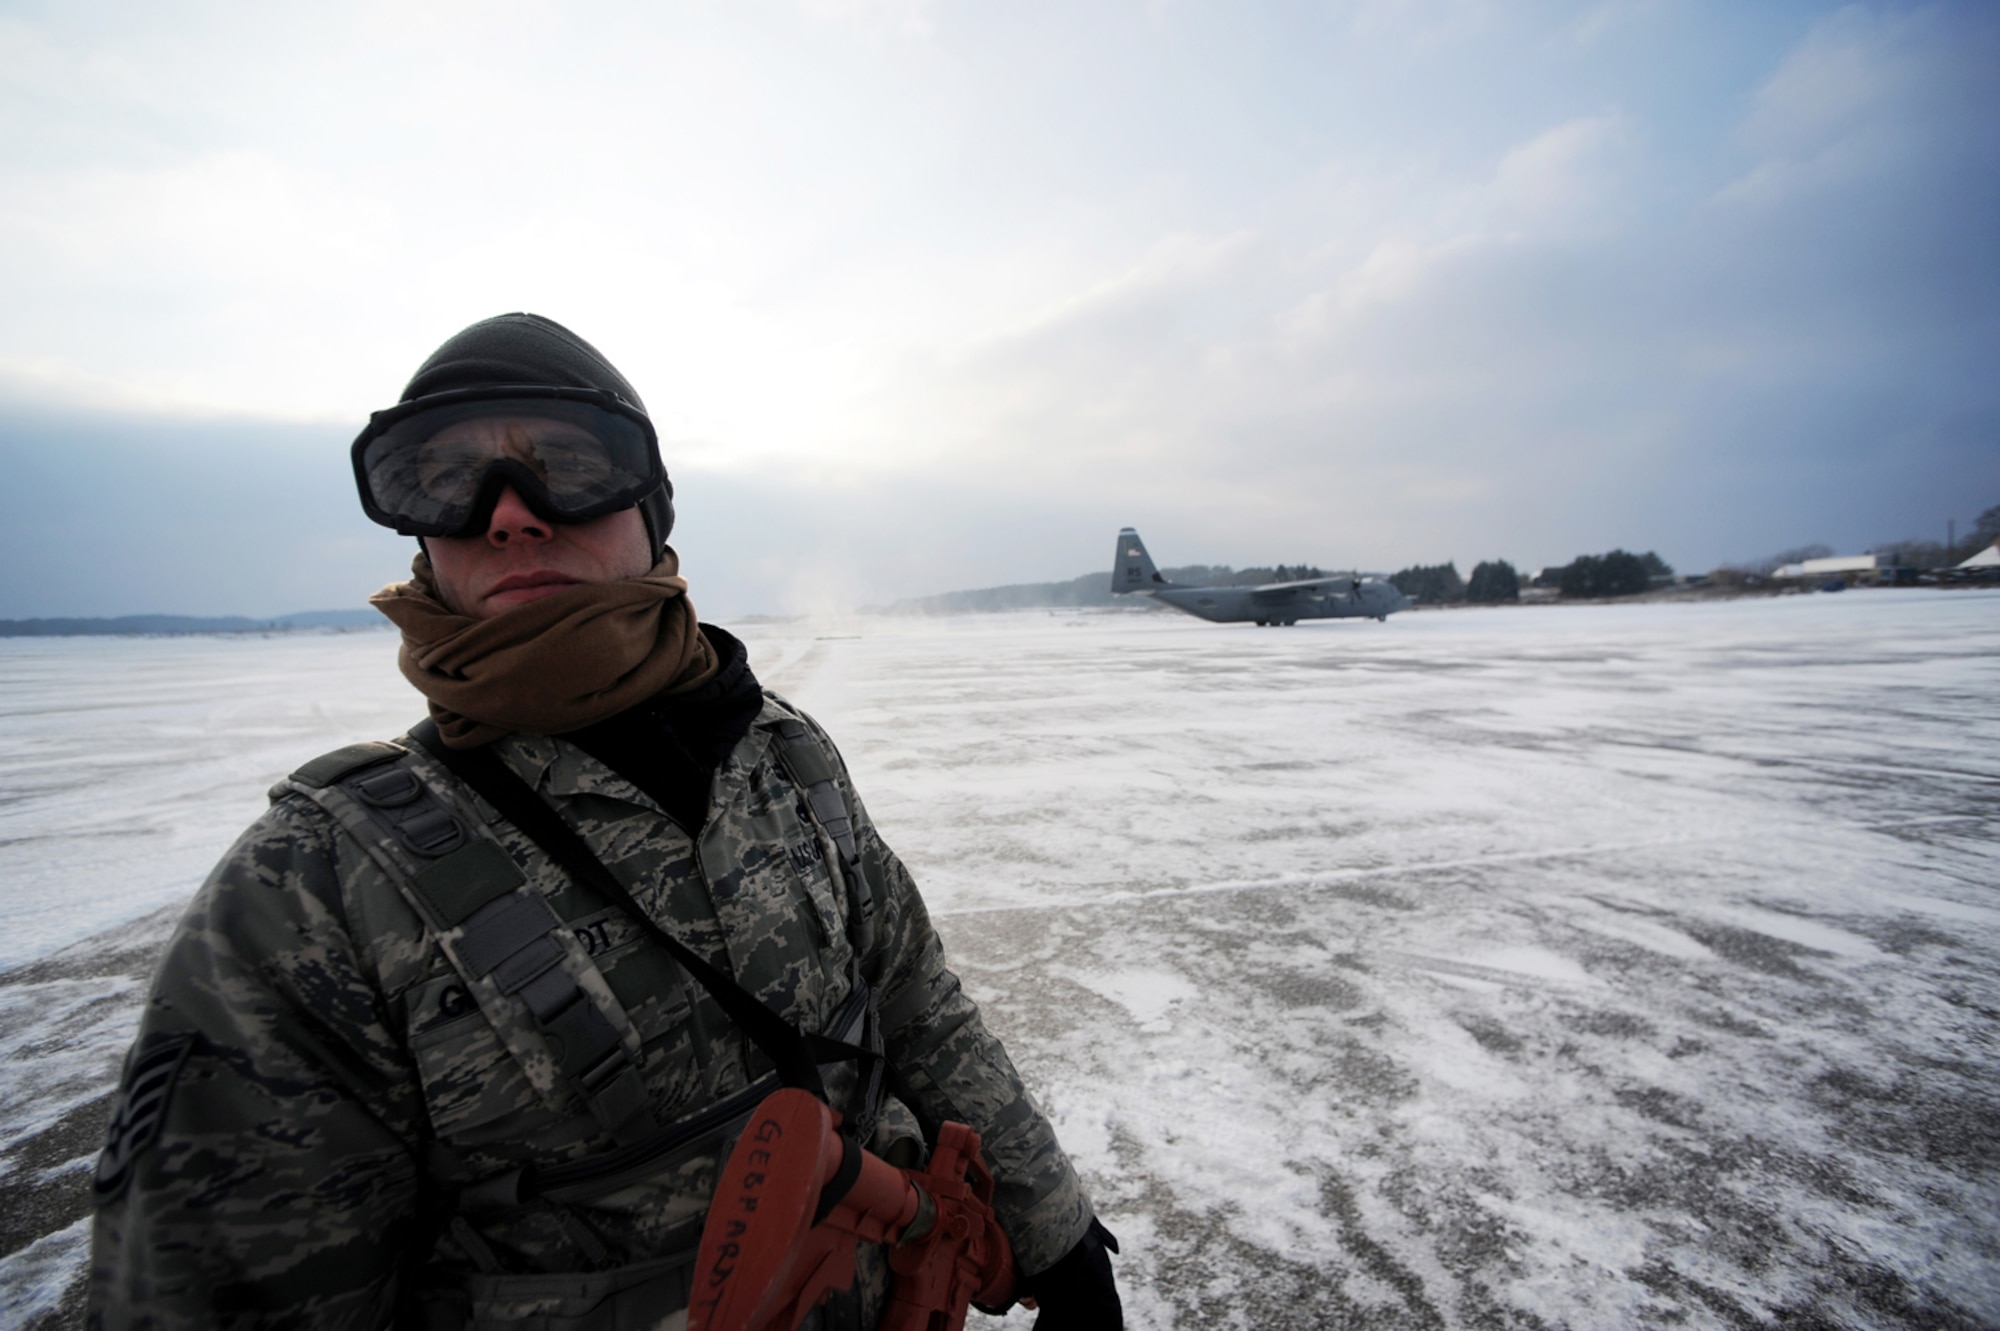 U.S. Air Force Staff Sgt. Justin Gedhardt, 435th Air Mobility Squadron, Ramstein Air Base, Germany, pulls security for a C-130 Hercules as it approaches the parking area at Flugplatz Bitburg, Germany, Jan. 26, 2010, in preparation of Ramstein's operational readiness inspection in September. The units are setting up bare-base operations as part of the dual-wing operational readiness exercise with the 86th Airlift Wing. This is the second of five operational readiness exercises. (U.S. Air Force photo by Staff Sgt. Sarayuth Pinthong)